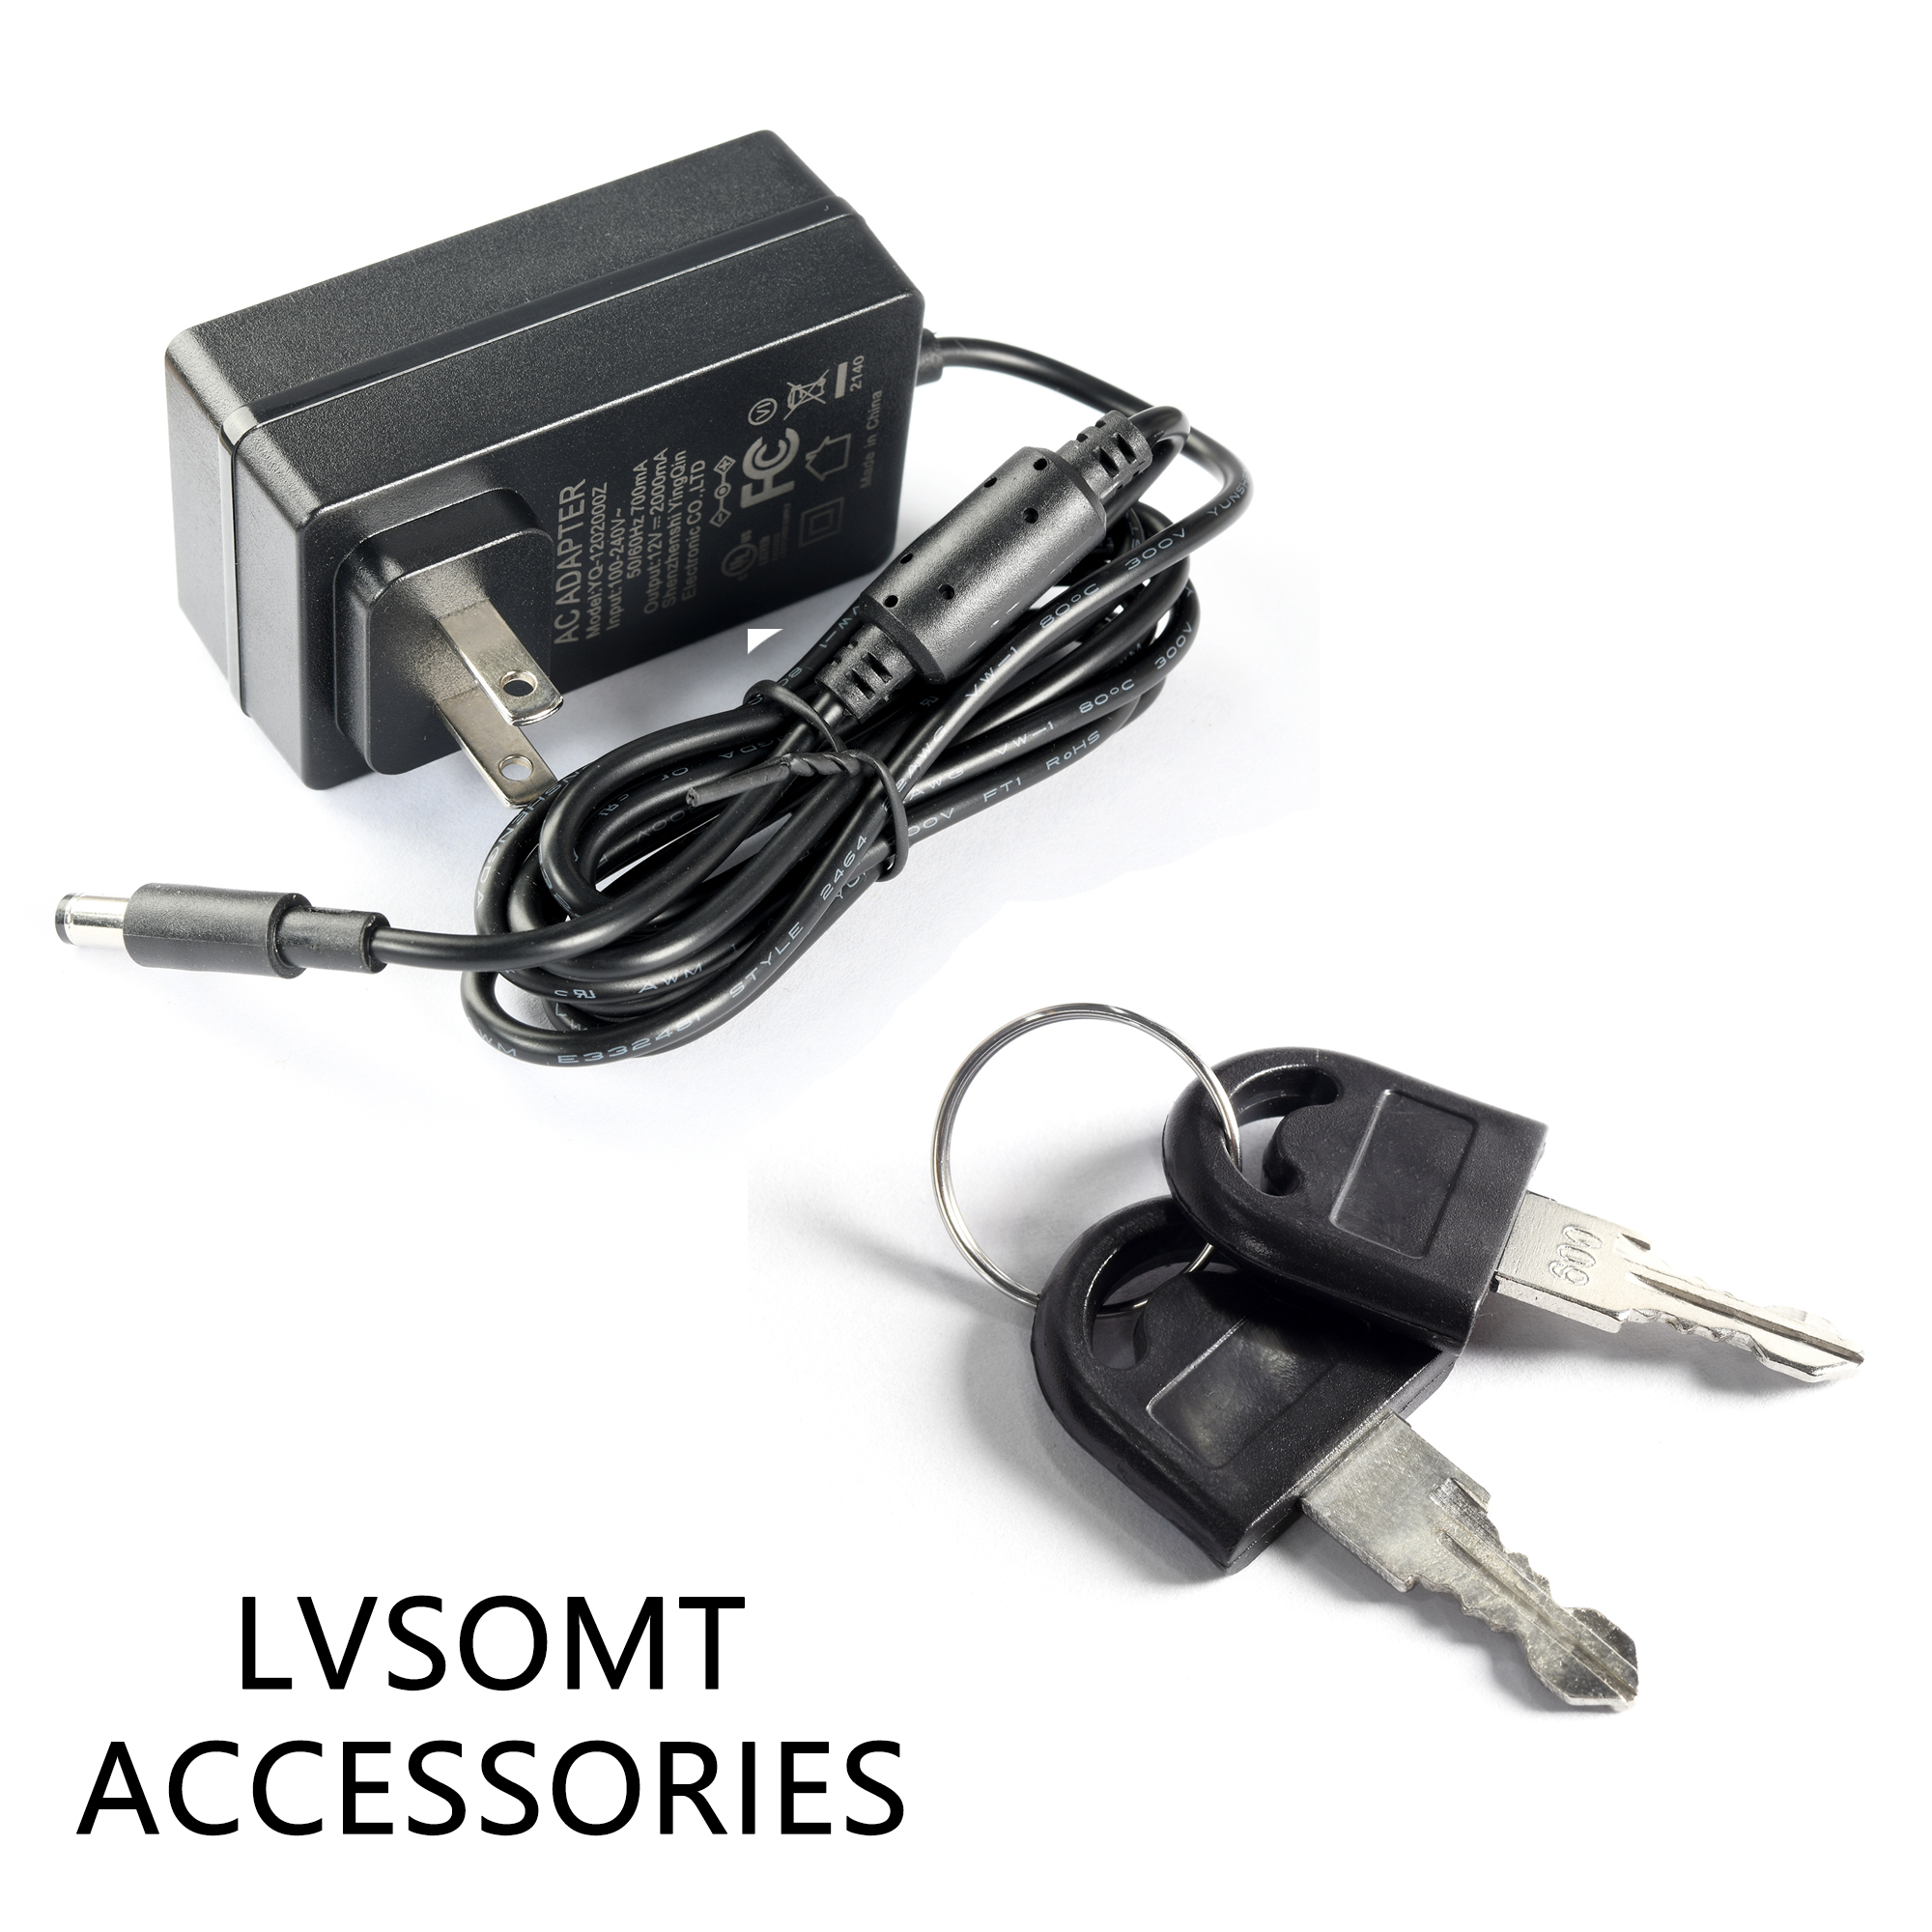 LVSOMT PRODUCTS ACCESSORIES